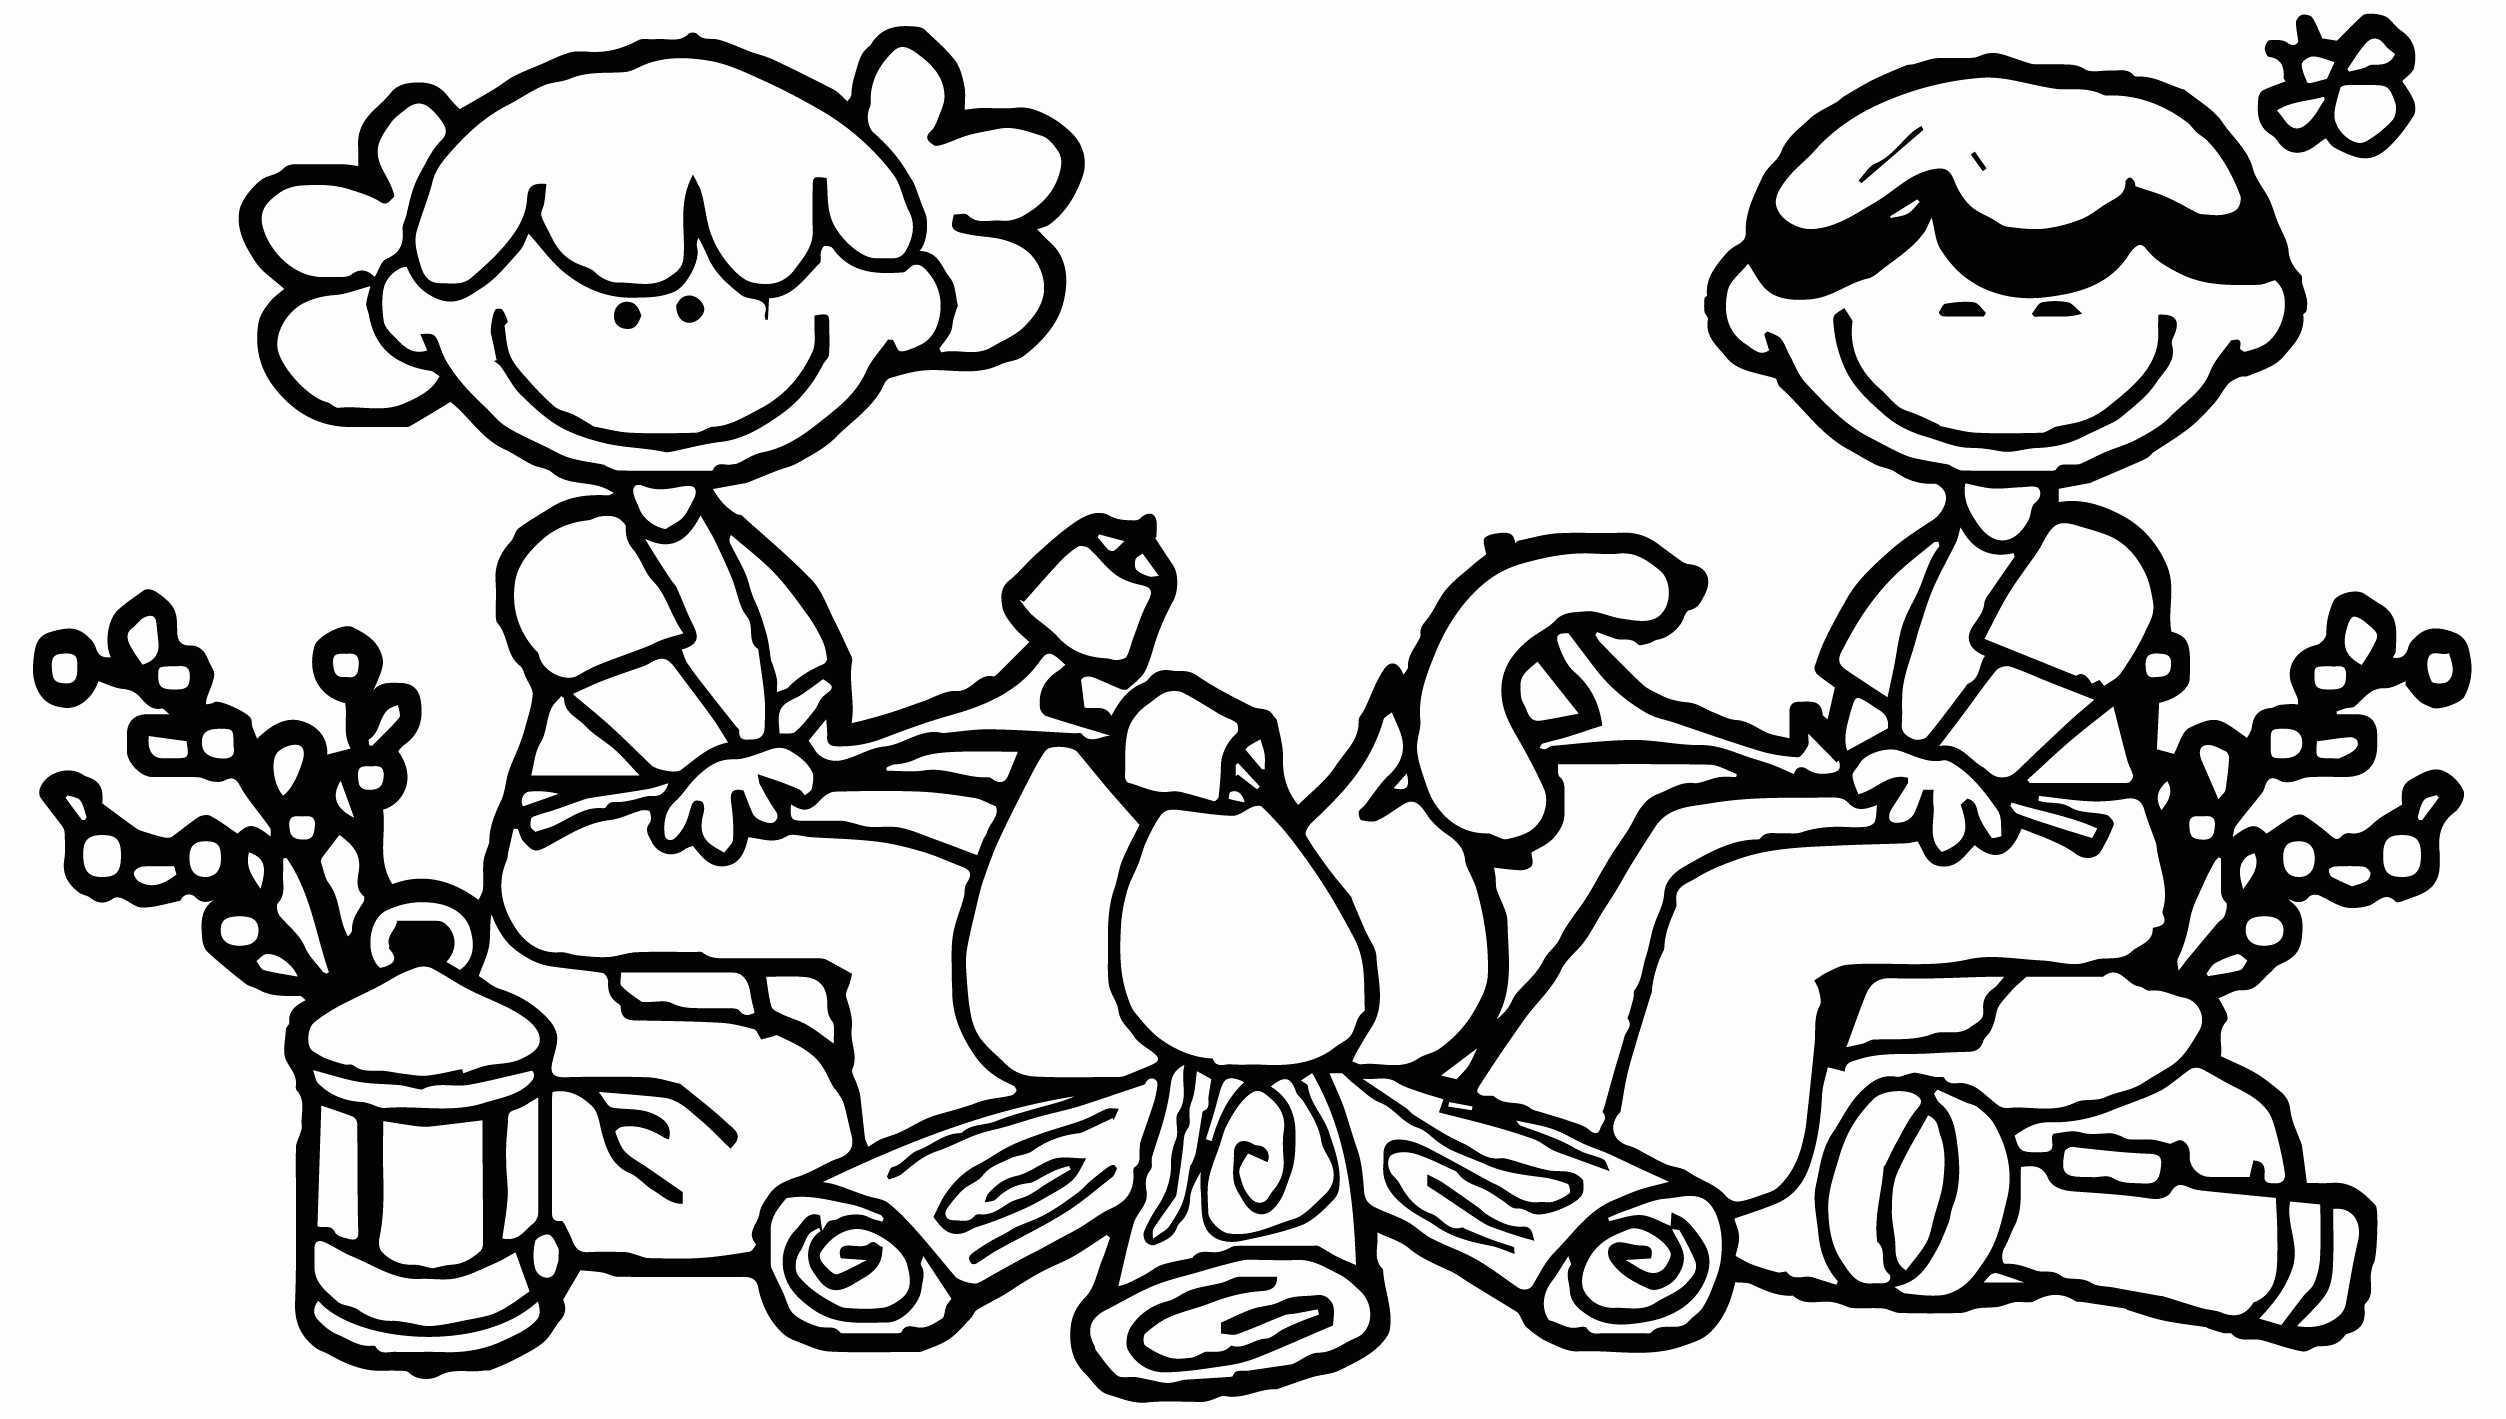 Ck7 campfire Coloring Page